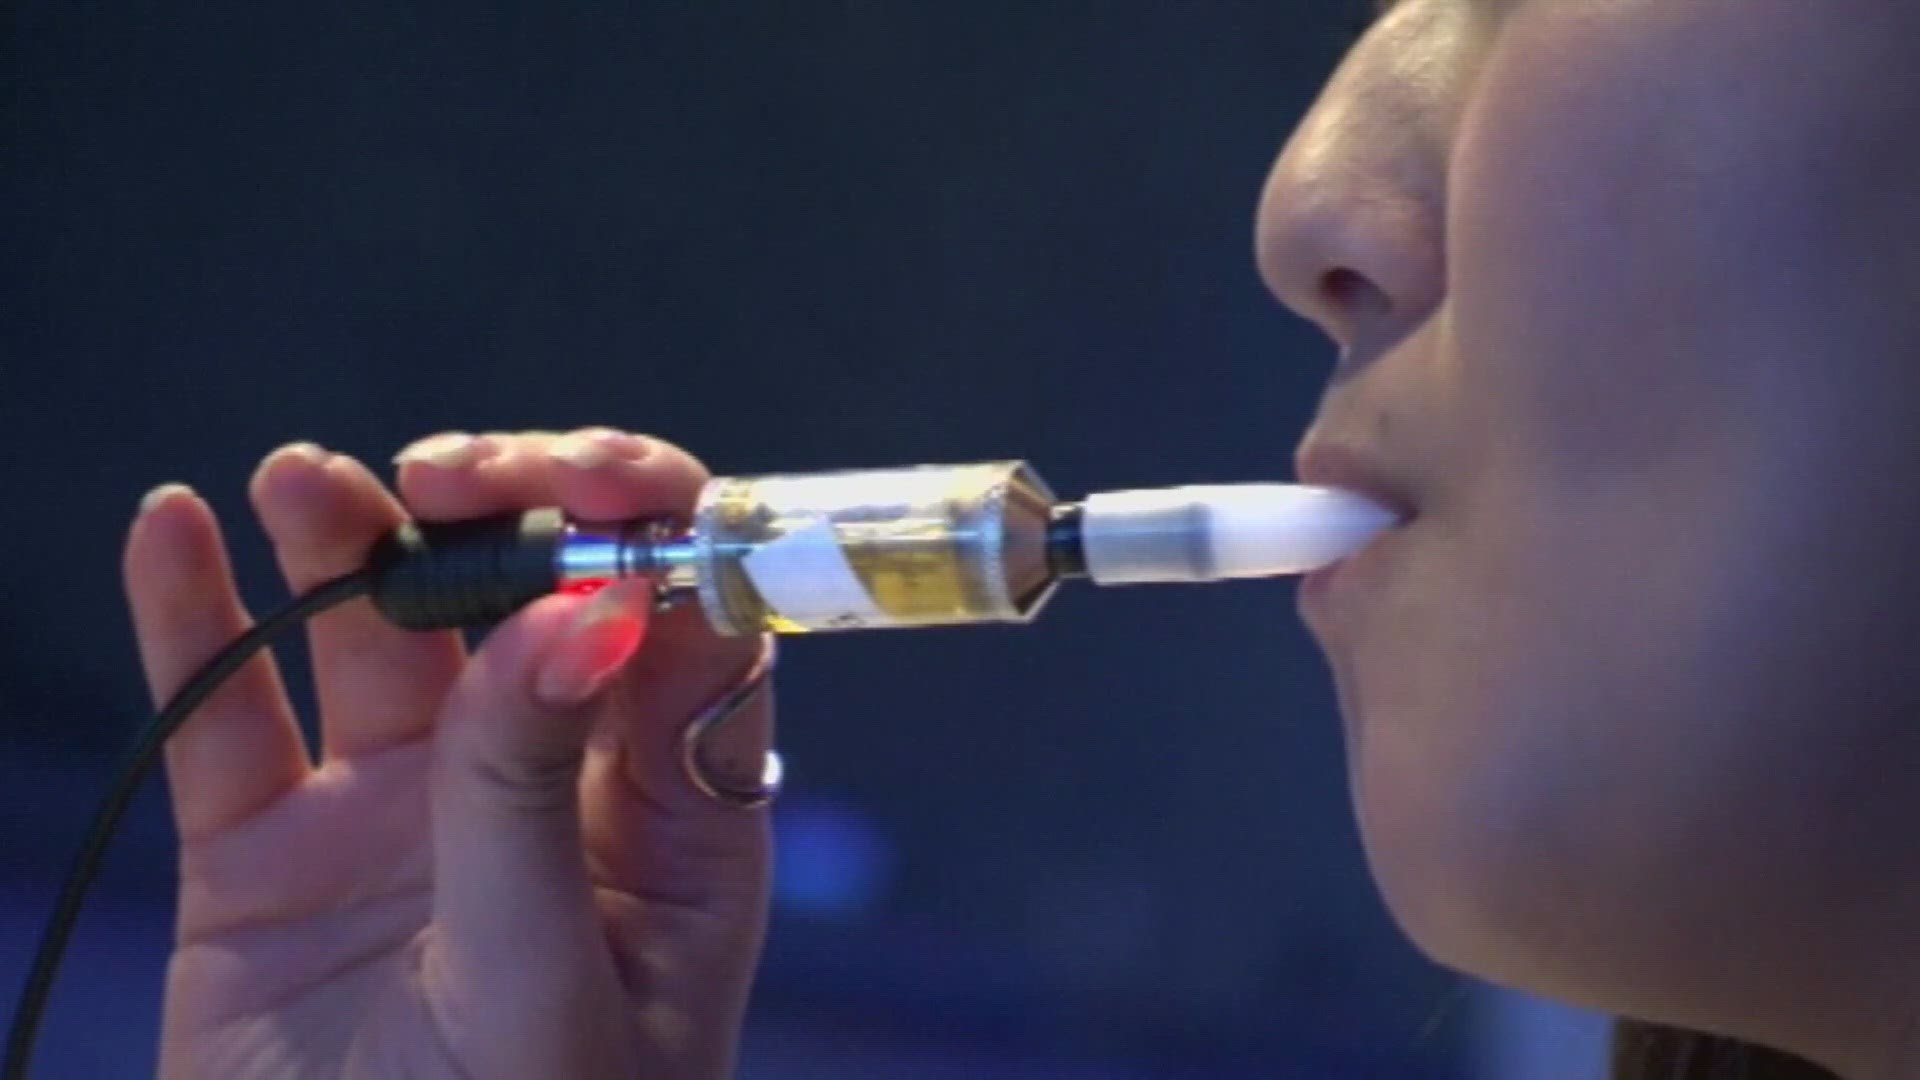 Ohio communities will be unable to vote to restrict things like flavored e-cigarettes and sales of flavored vaping products.